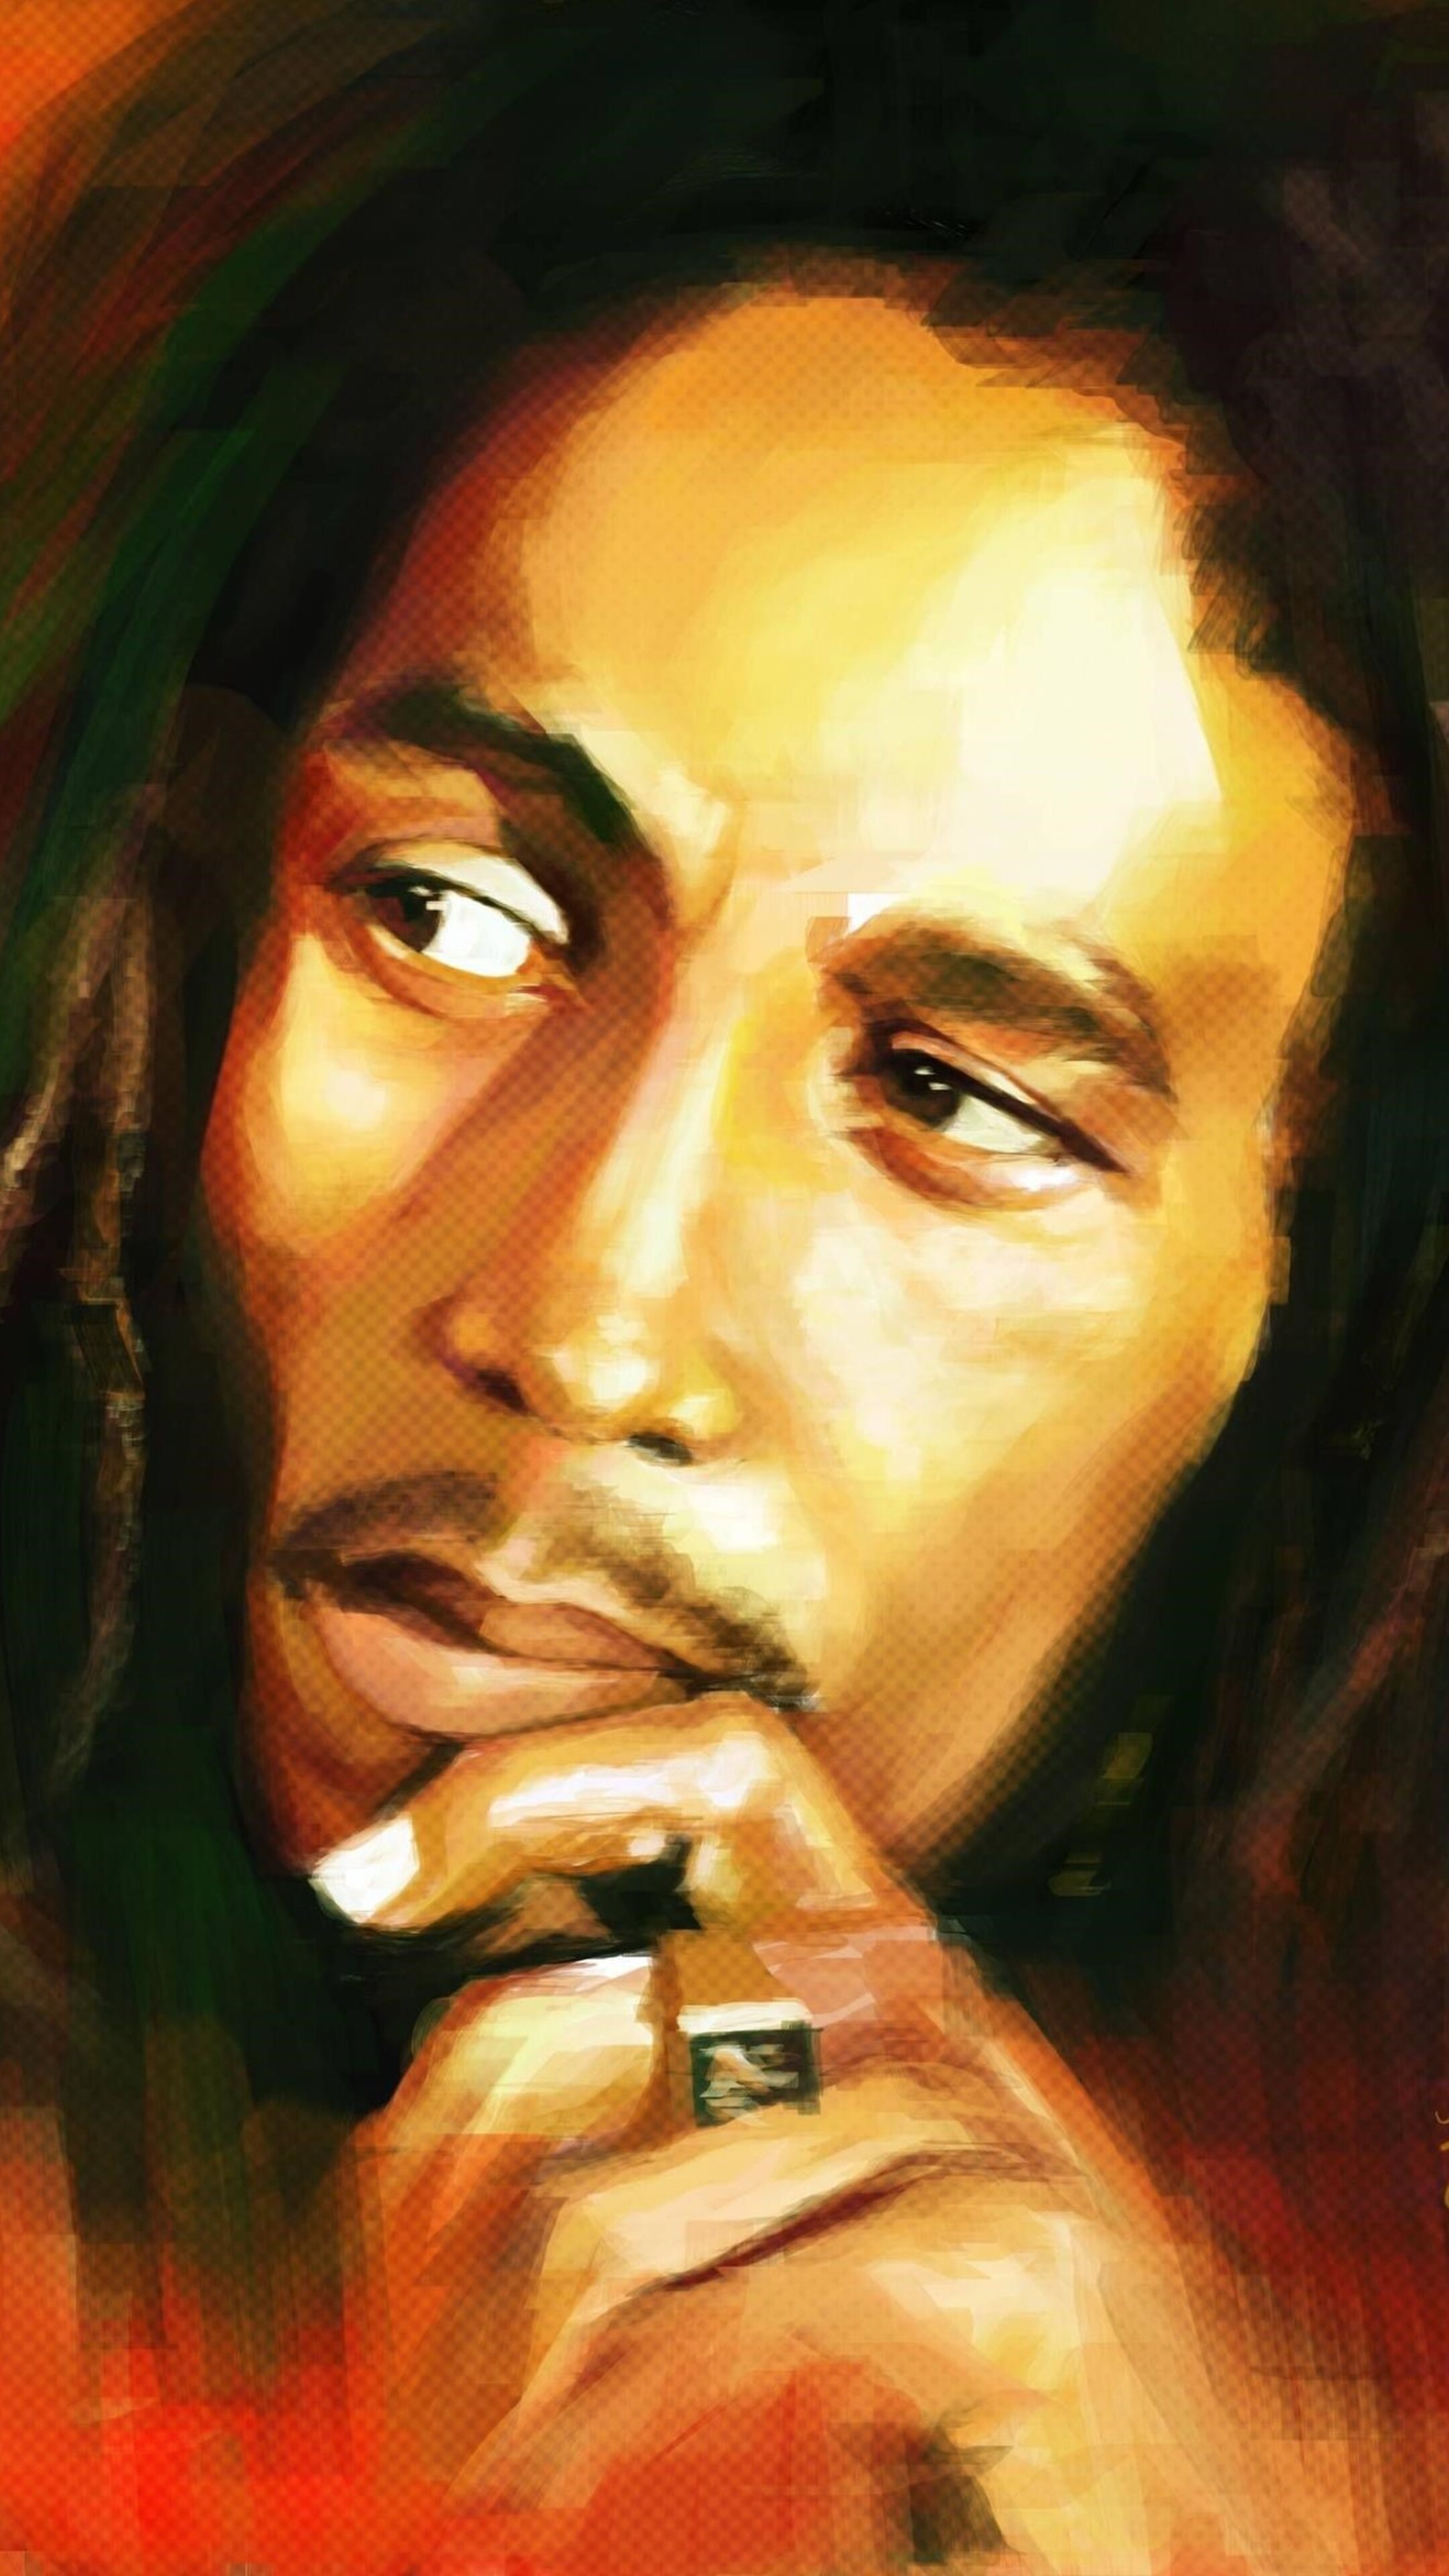 Bob Marley: A global figure in popular culture to this day, Reggae. 2160x3840 4K Wallpaper.